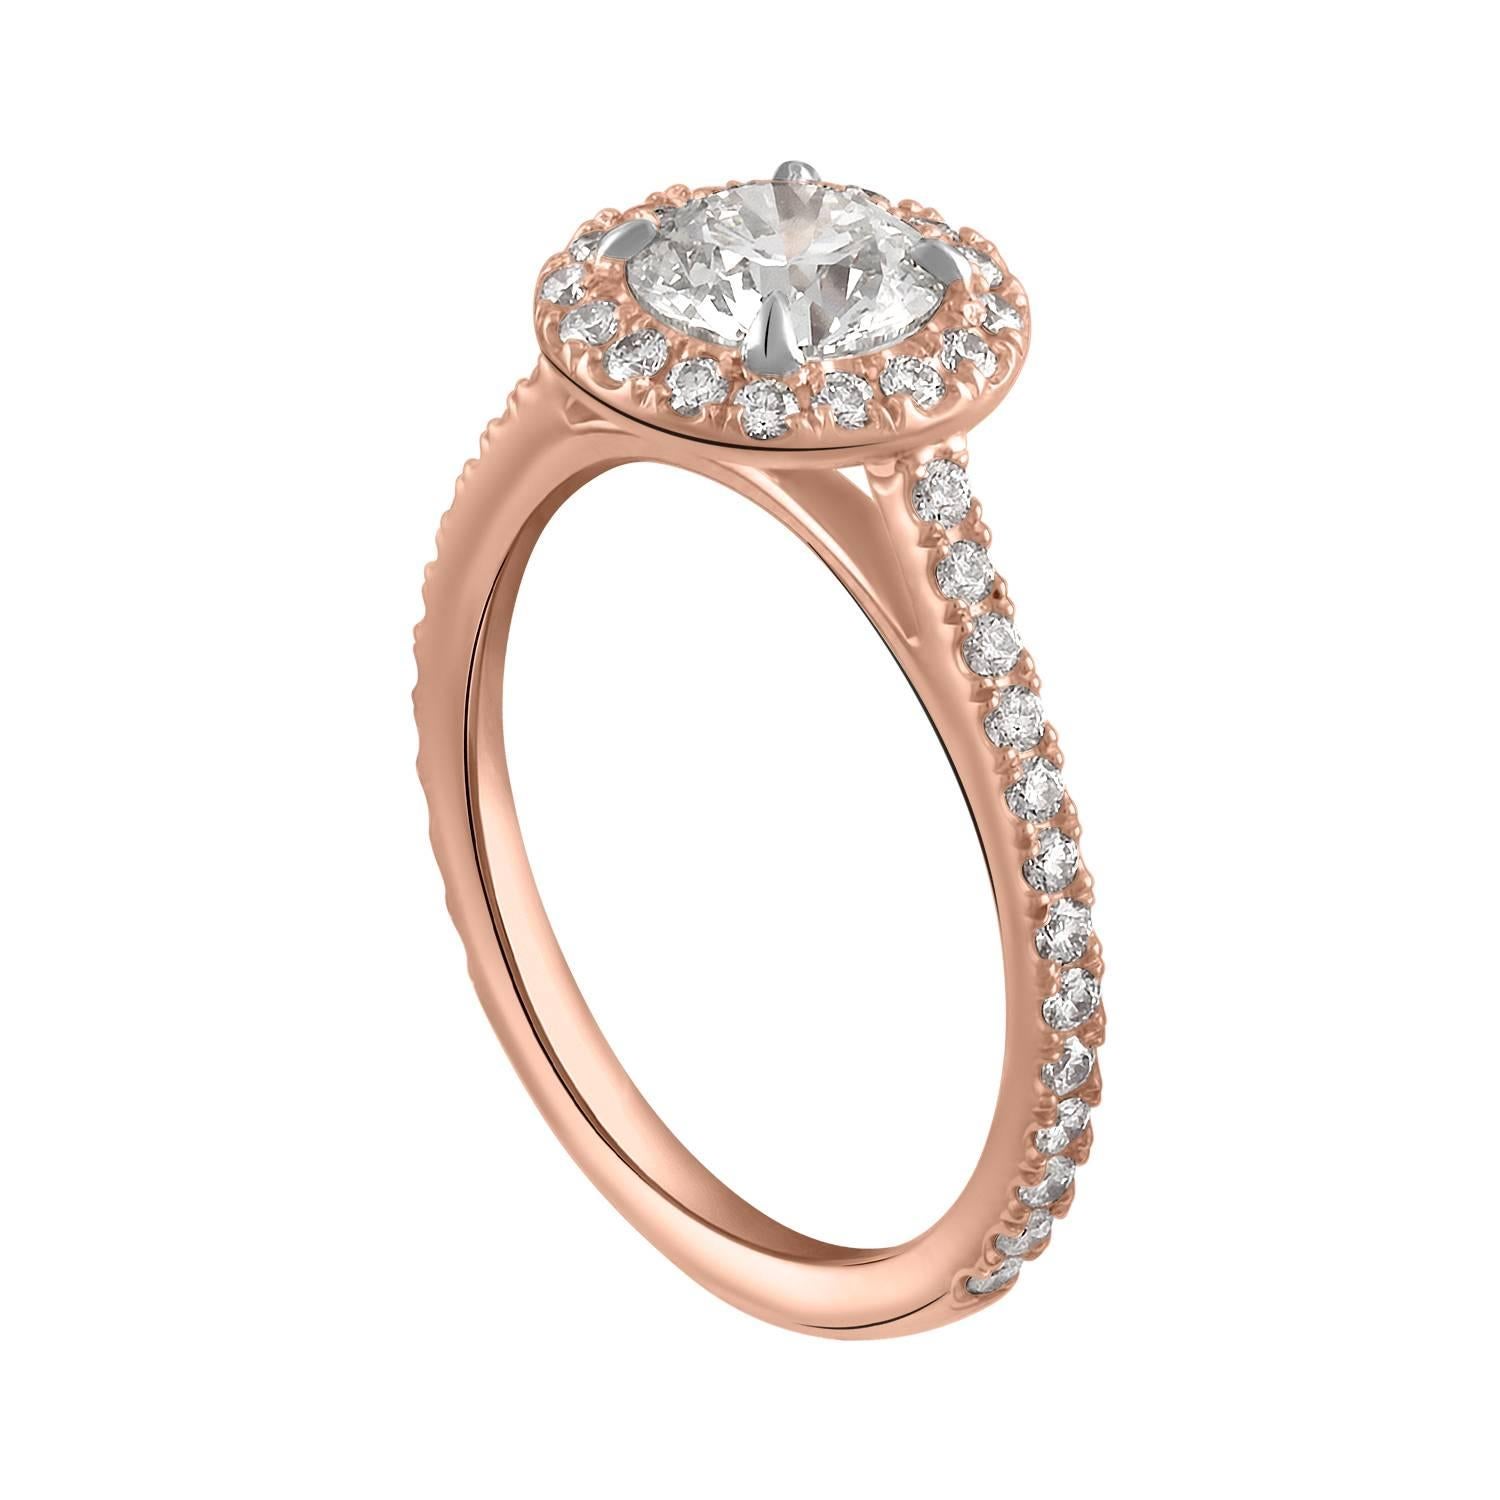 Shah & Shah's handmade 18k rose gold, platinum, and 0.90ct G/VS1 GIA certified round brilliant cut diamond set in a delicate micropave surround with 0.42cts of 1.3mm round brilliant cut diamonds. Part of our 